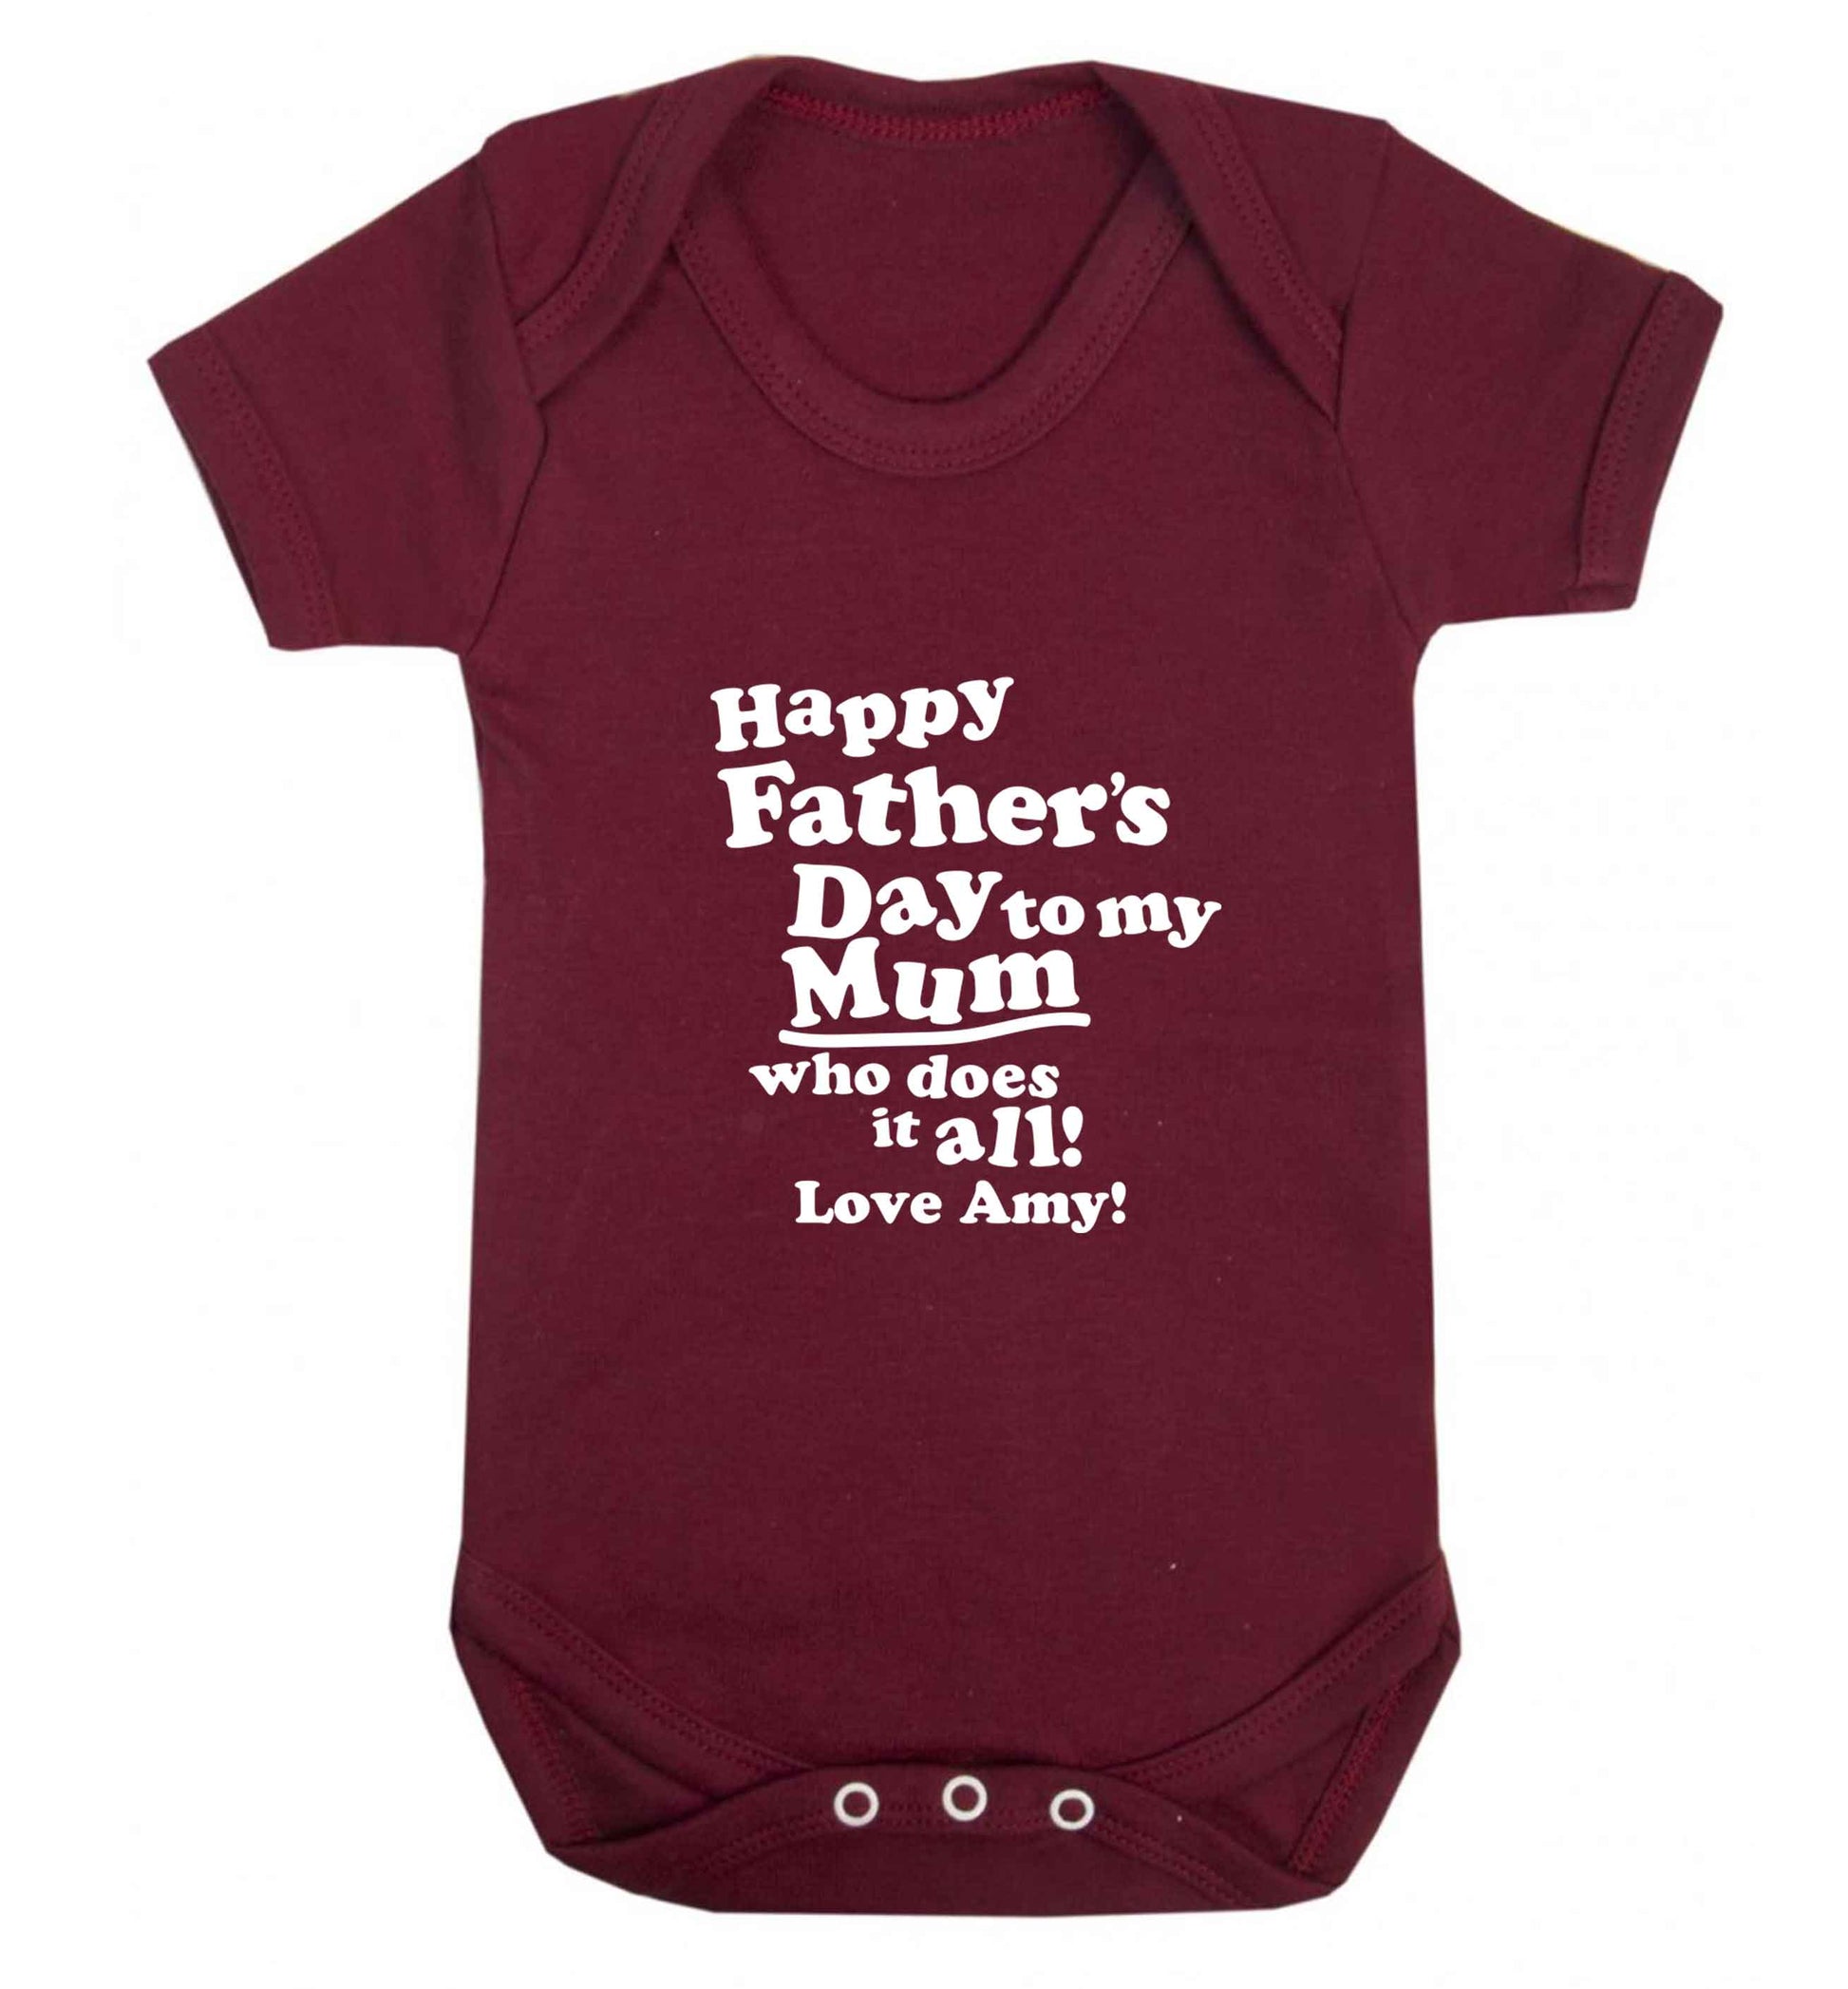 Happy Father's day to my mum who does it all baby vest maroon 18-24 months